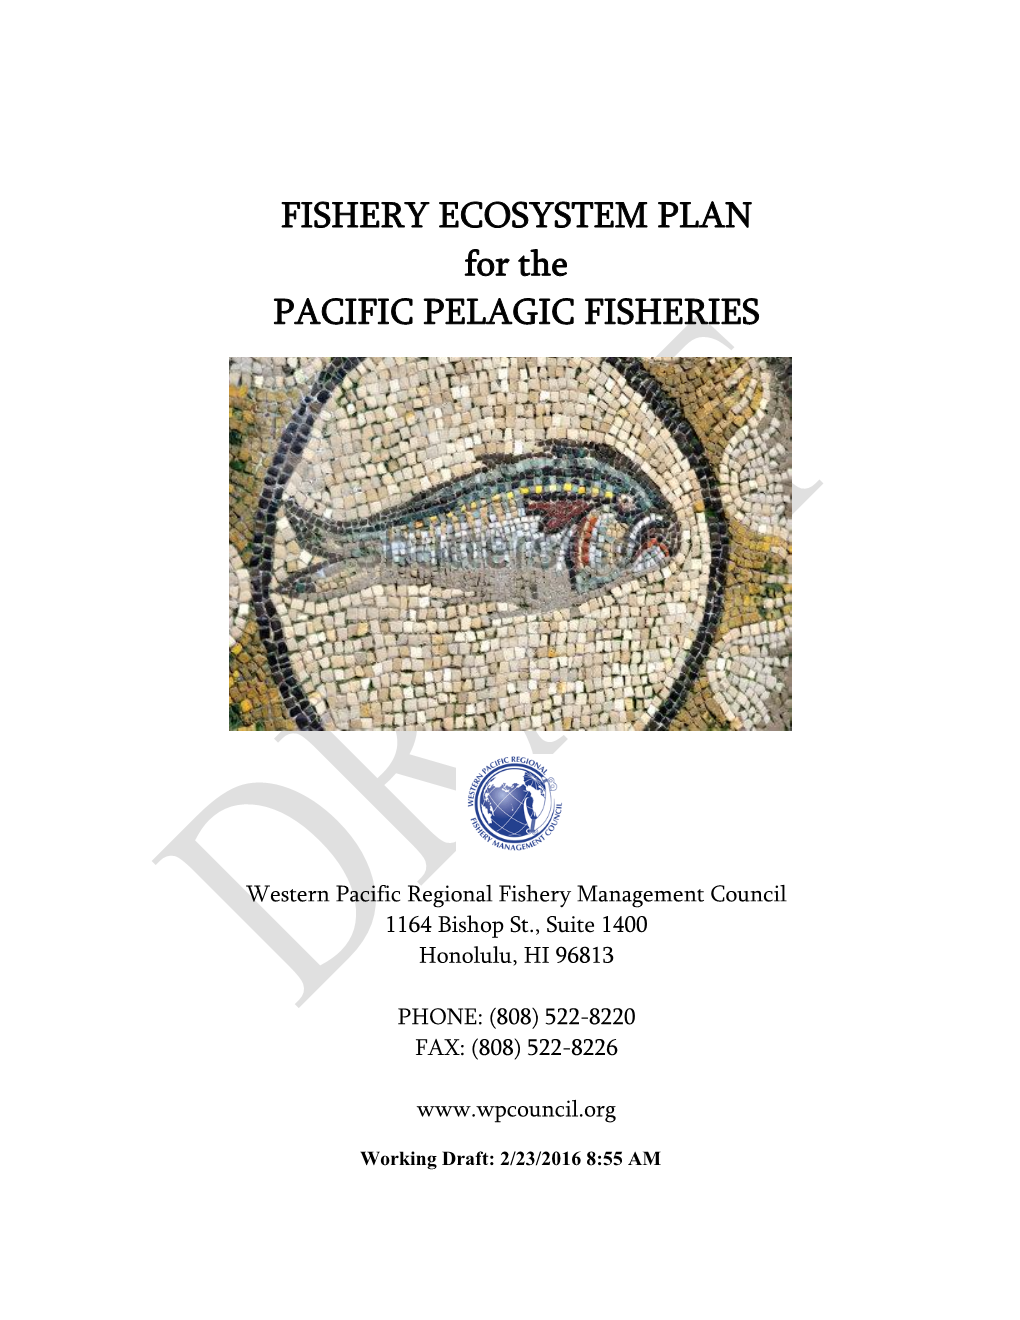 FISHERY ECOSYSTEM PLAN for the PACIFIC PELAGIC FISHERIES